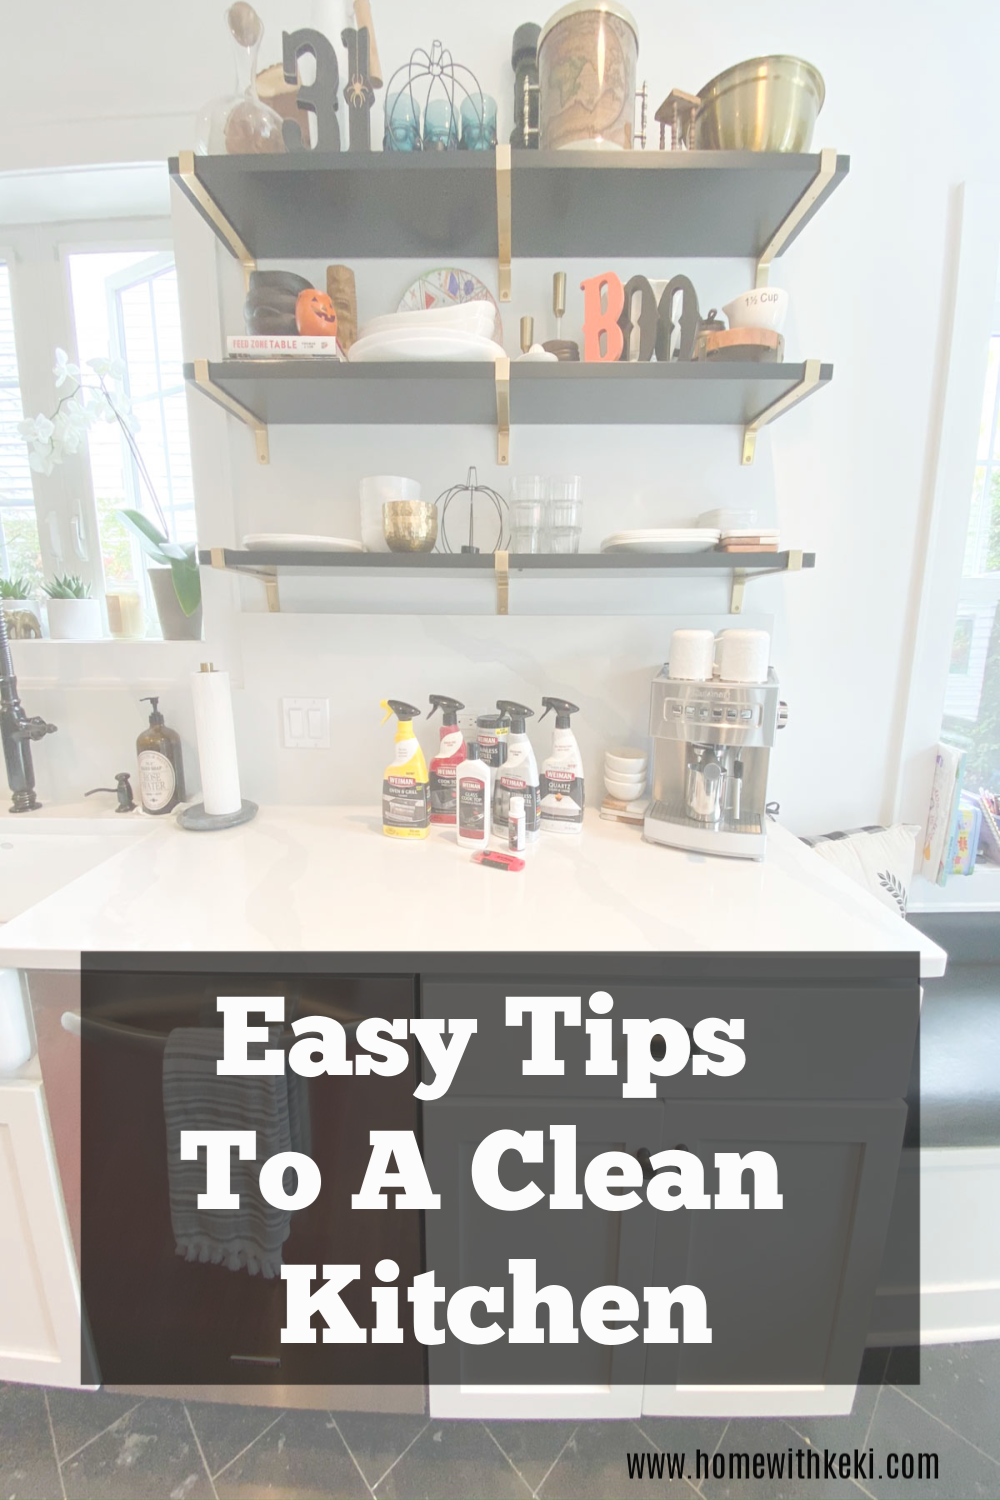 Quick and easy tips for keeping the kitchen clean. Kitchen cleaning products that get the job done. #kithcencleaning #cleankitchen #cleaningproducts